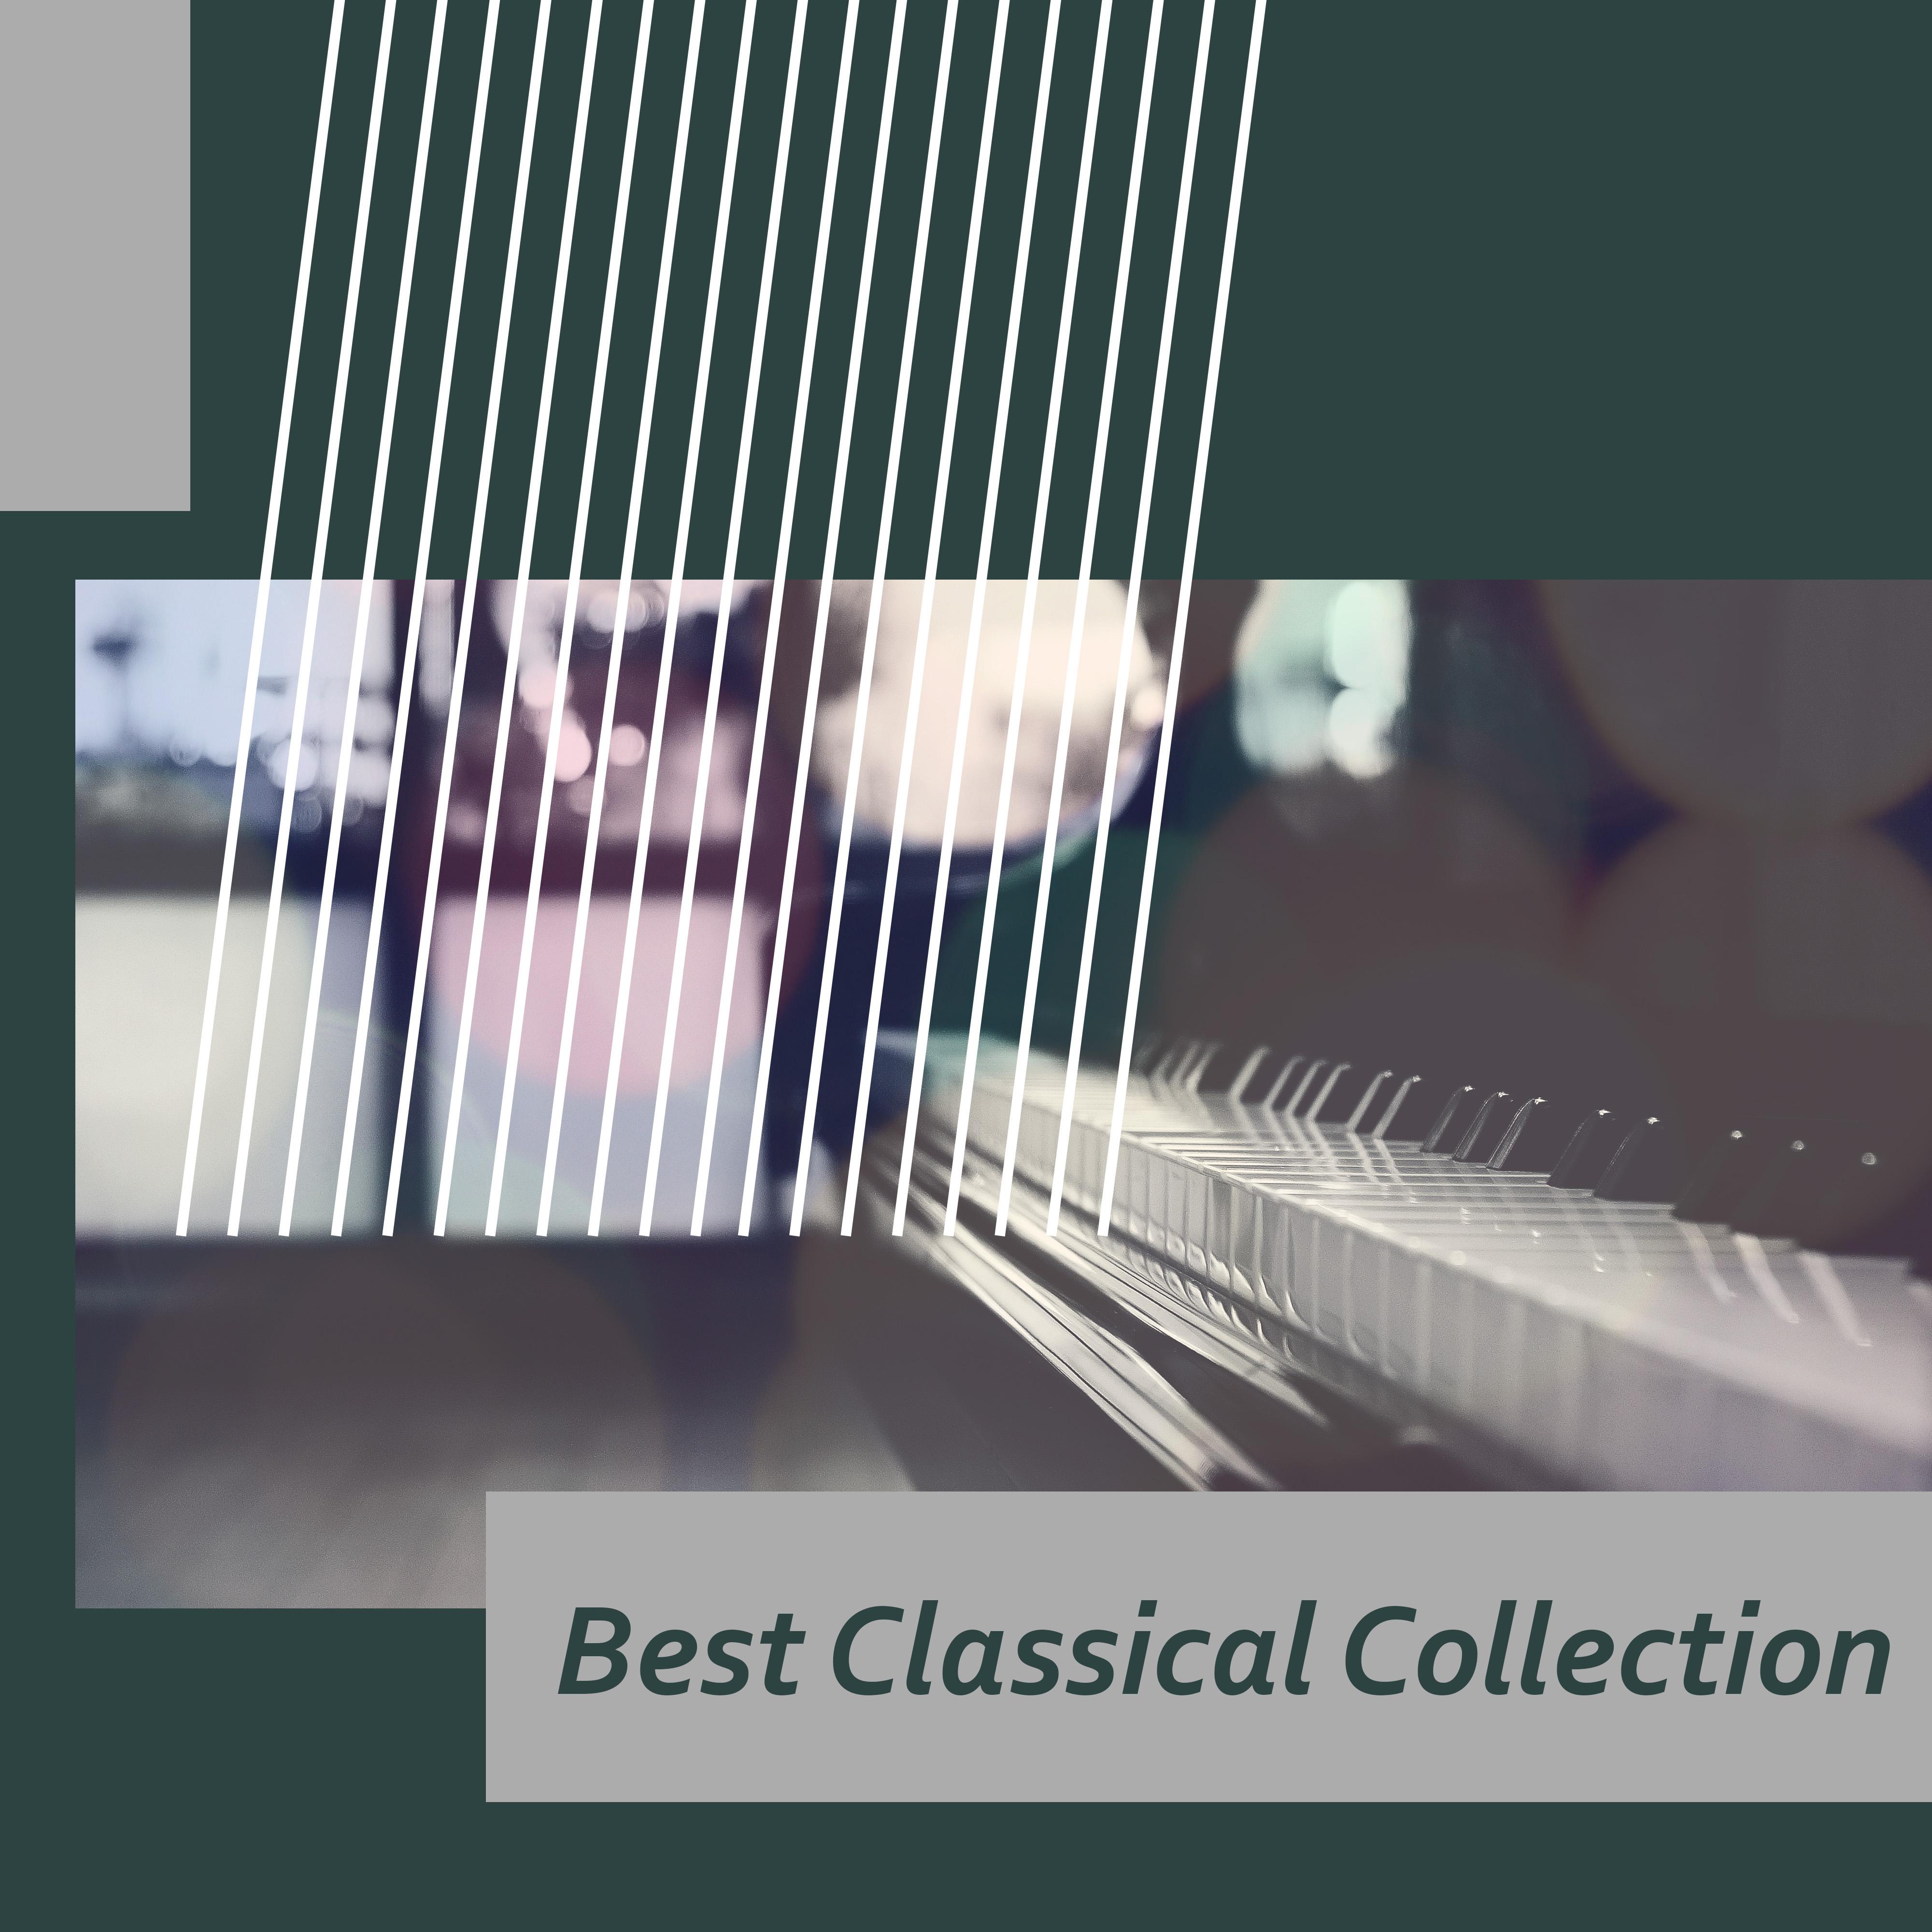 Best Classical Collection - Classical Music for Background to Reading, Focus Training, Music for Learning, Mozart